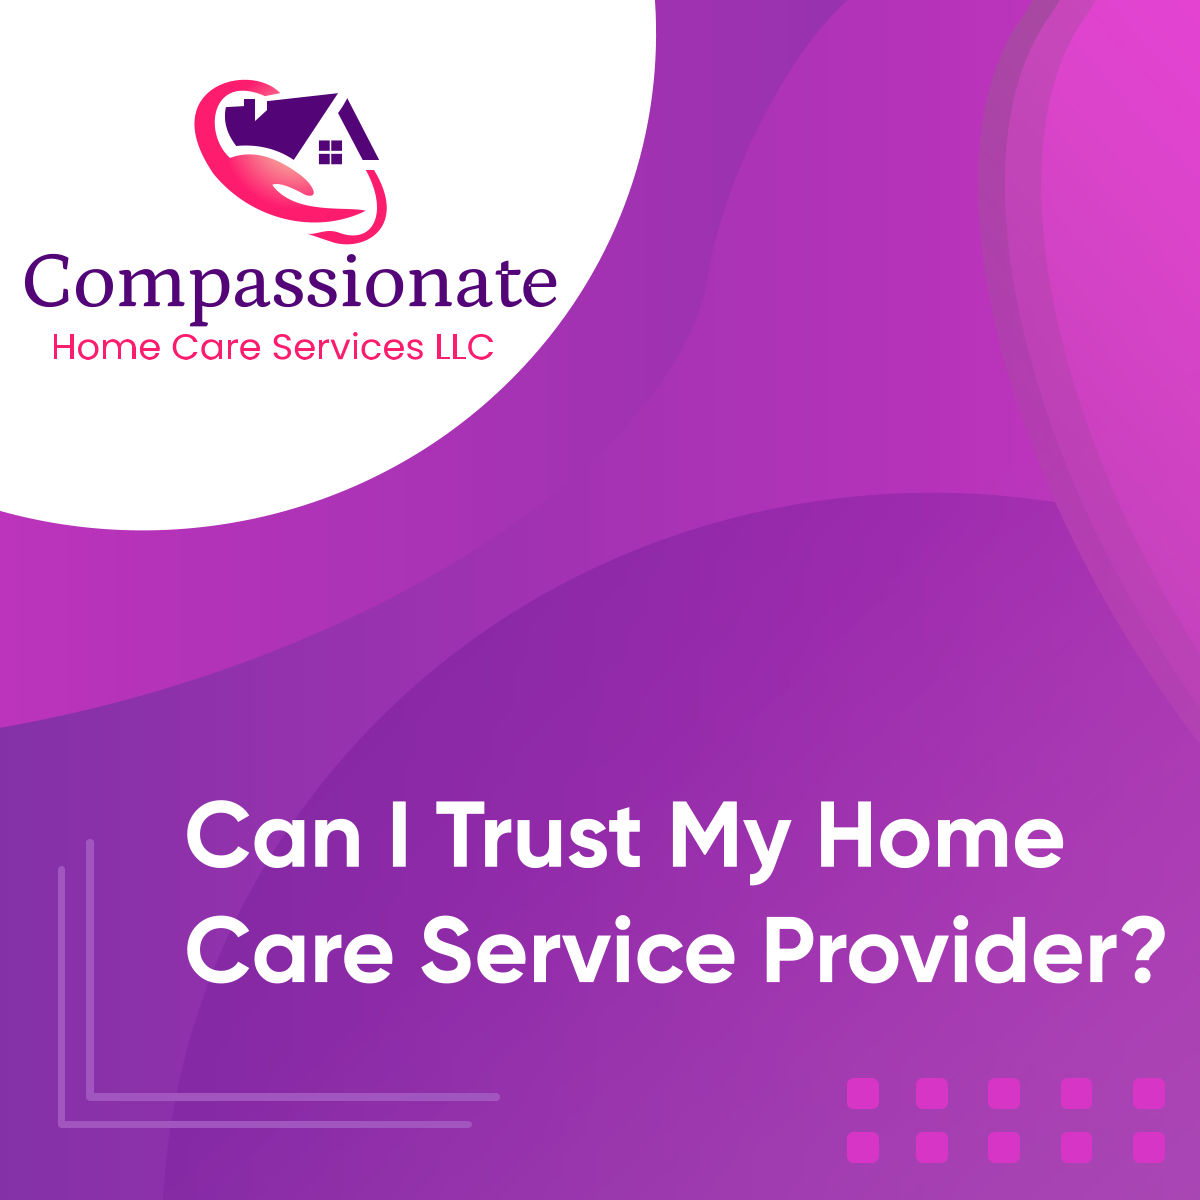 Most home care providers in the country are certified members of the Home Care Association in America, which continuously provide education, training, and advocacy for home care professionals. Call us now to learn more.

#IndependenceOH #HomeCare #HomeCareProvider